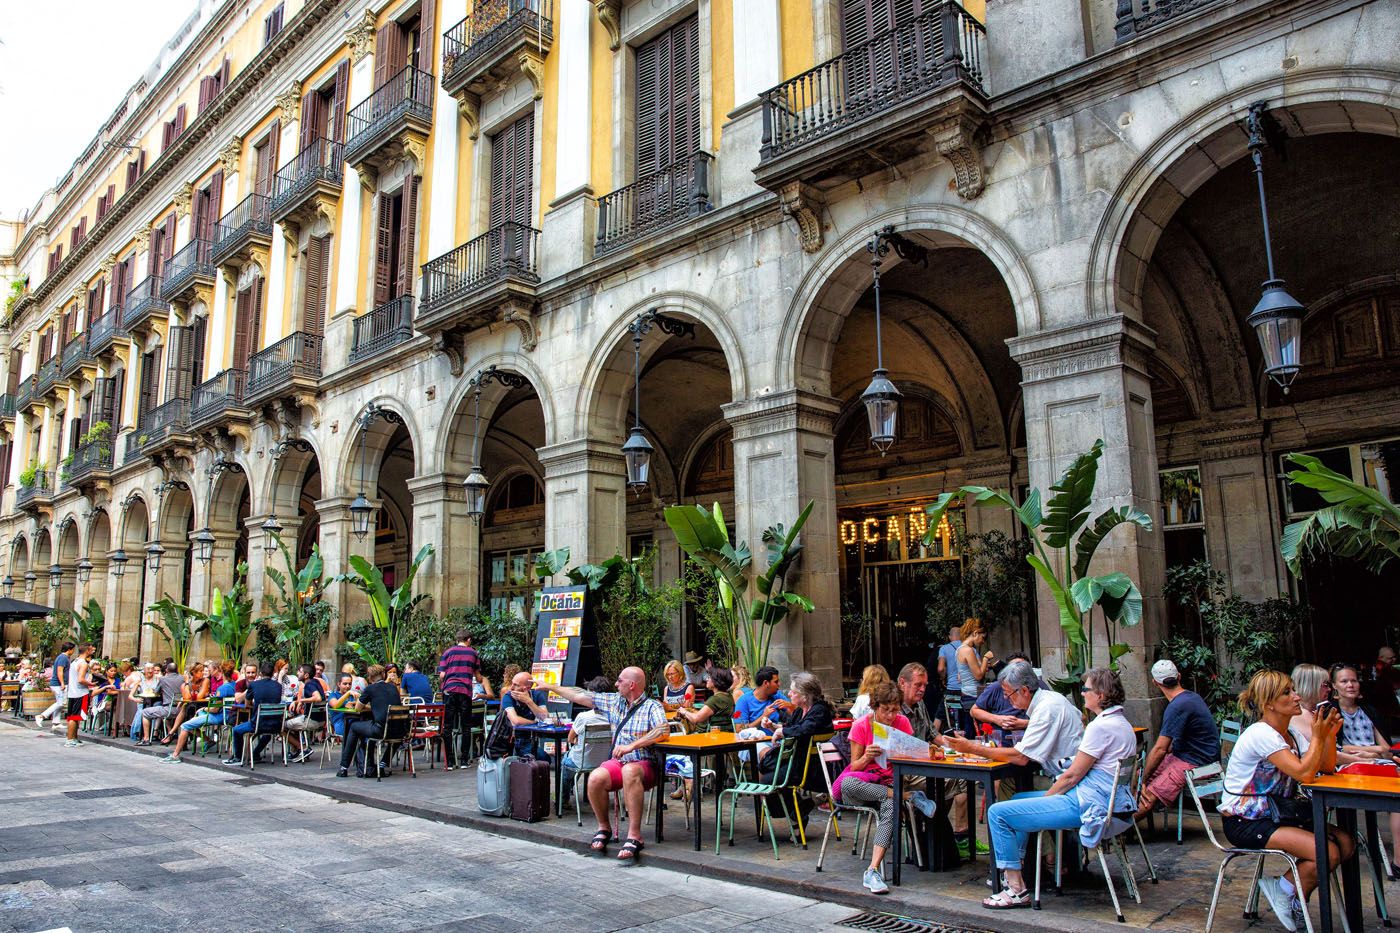 Visiting Beautiful Barcelona: Things to do, Easy Day Trips, and Travel Tips  — Lifestyle Blog